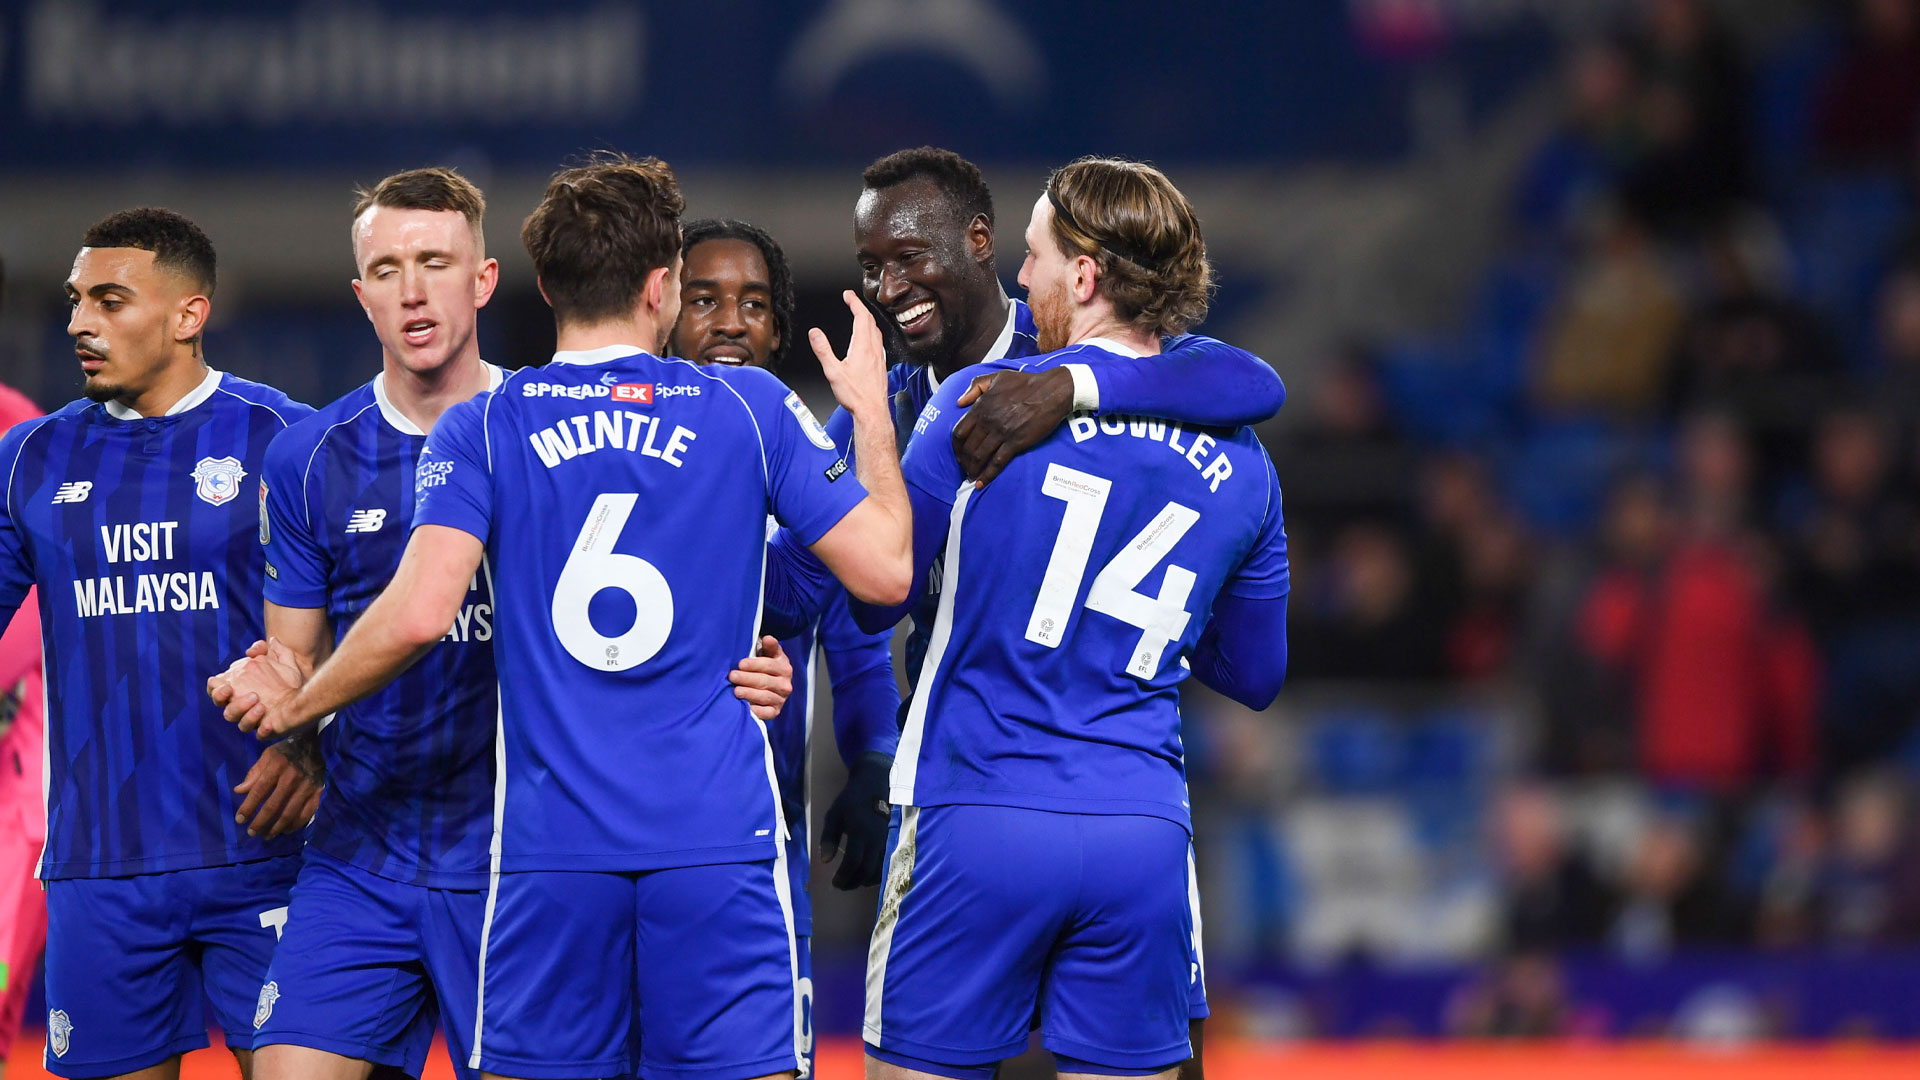 Cardiff City celebrate scoring against Huddersfield Town